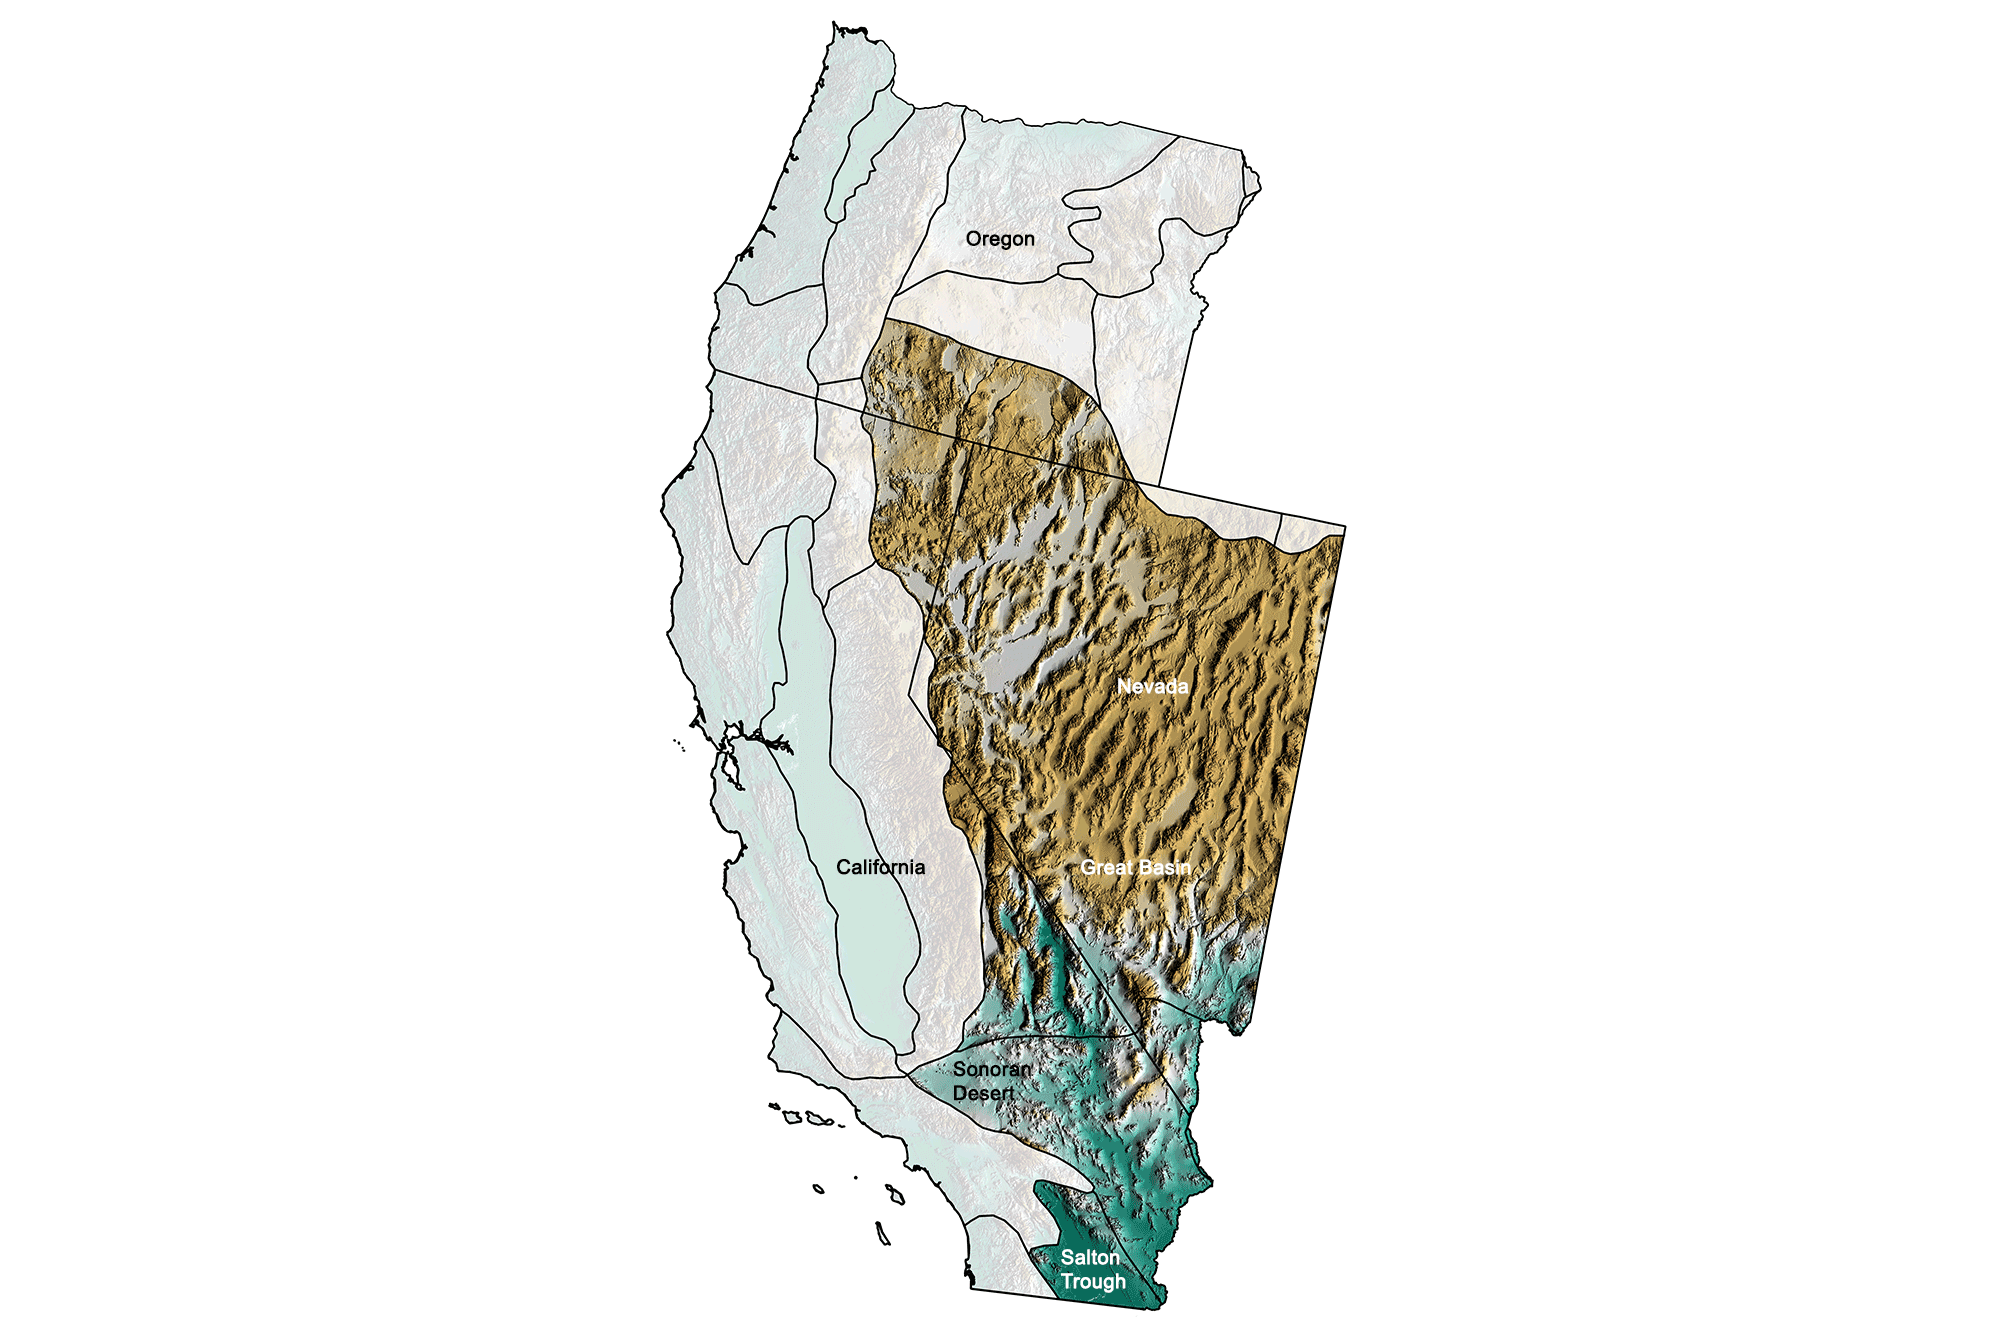 Topographic map of the Basin and Range region of the western United States.